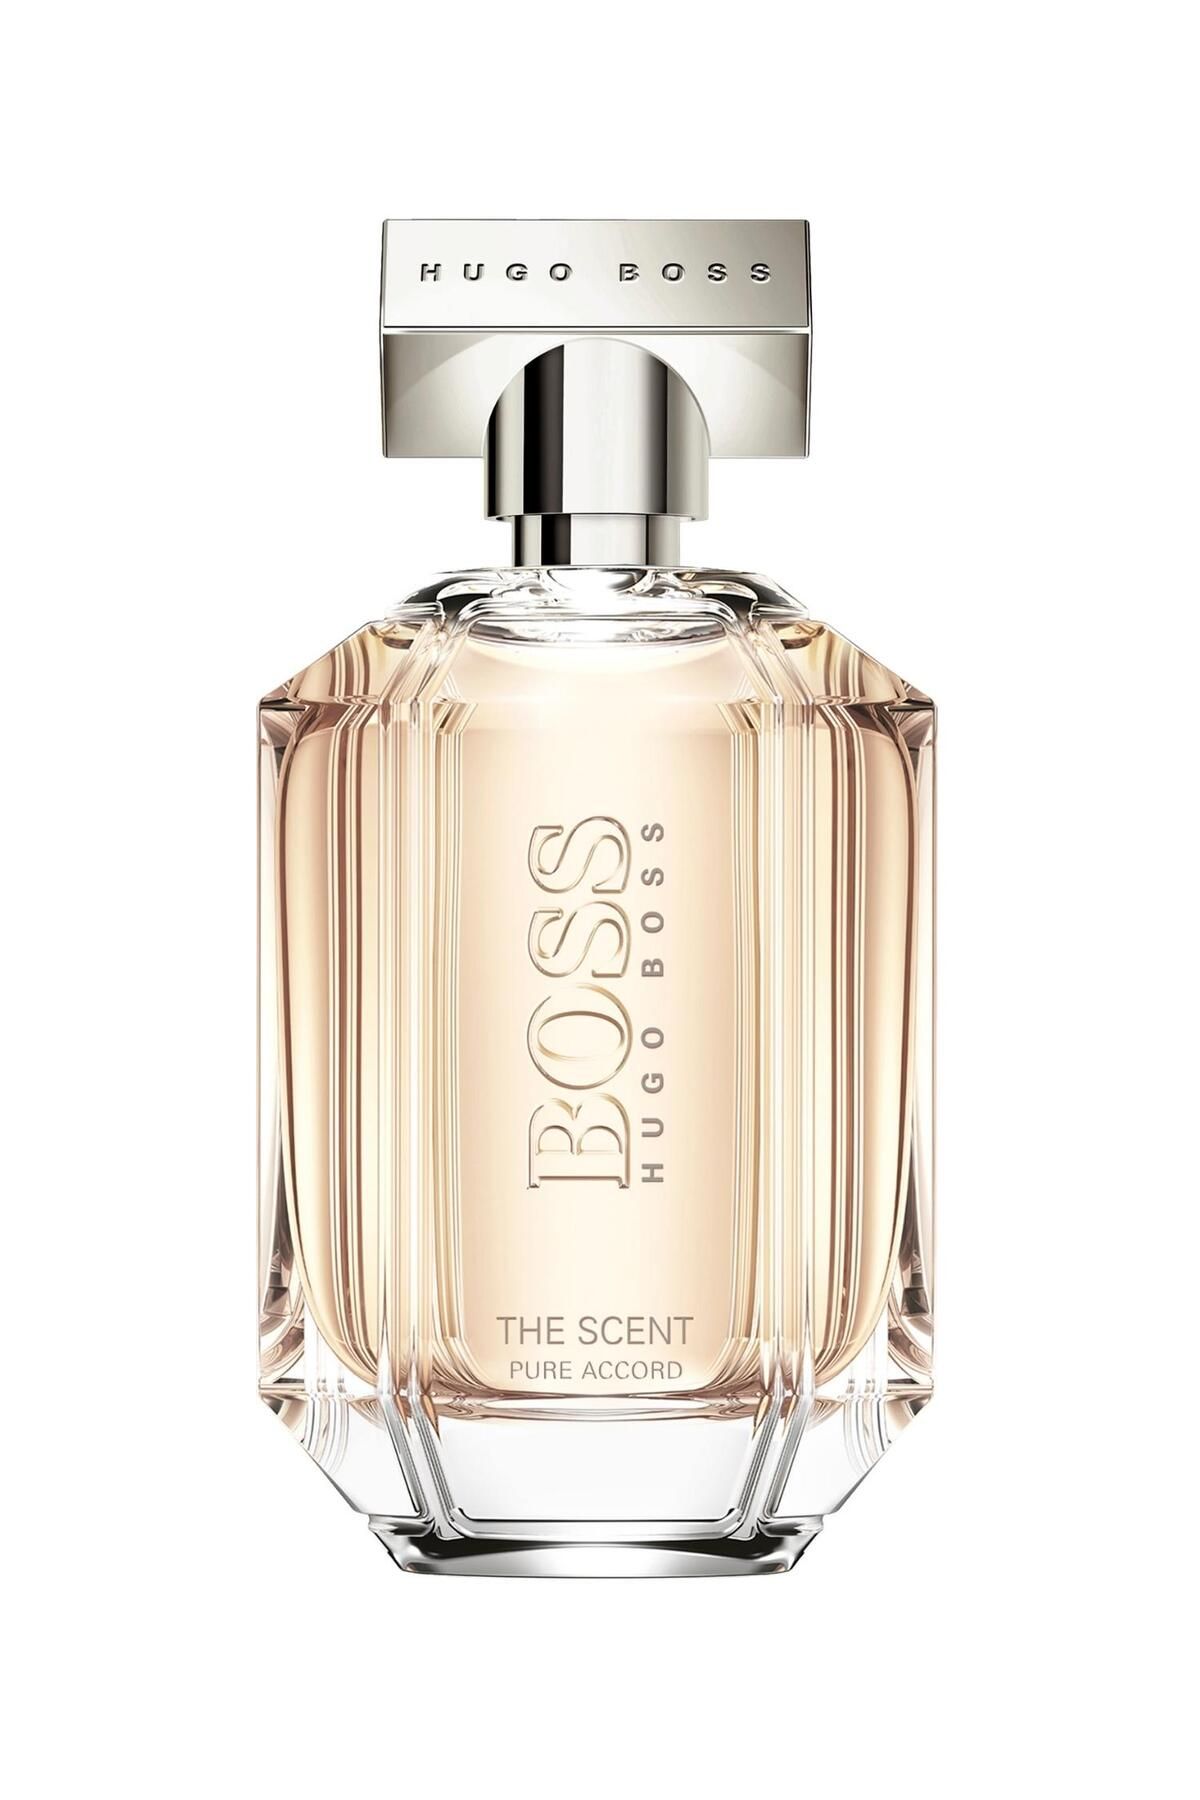 Hugo Boss the Scent for her (100 мл.). Hugo Boss the Scent for him 100мл. Парфюм Хьюго босс женские. Парфюмерная вода boss the scent for her